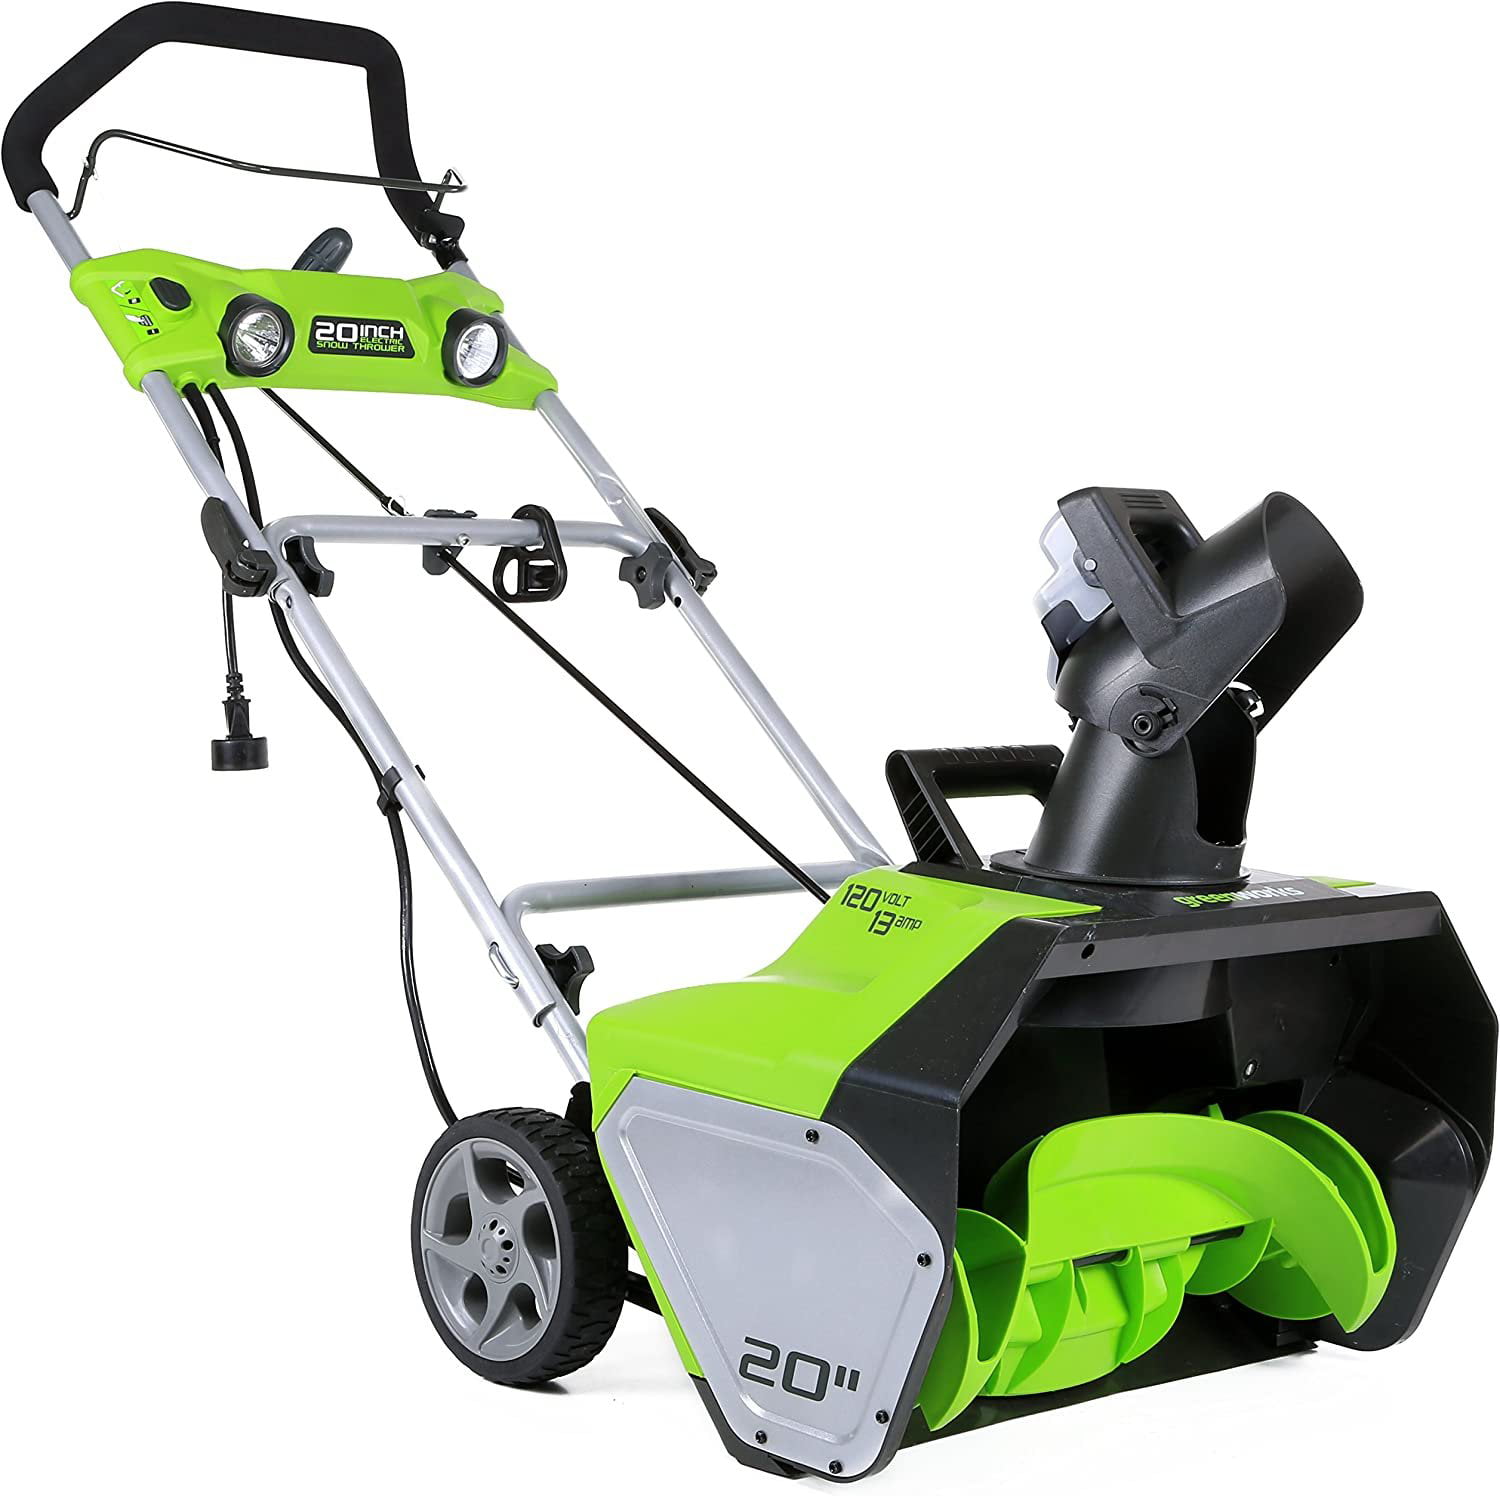 Greenworks 13 Amp 20-inch Electric Snowthrower with Light Kit, 2600202 